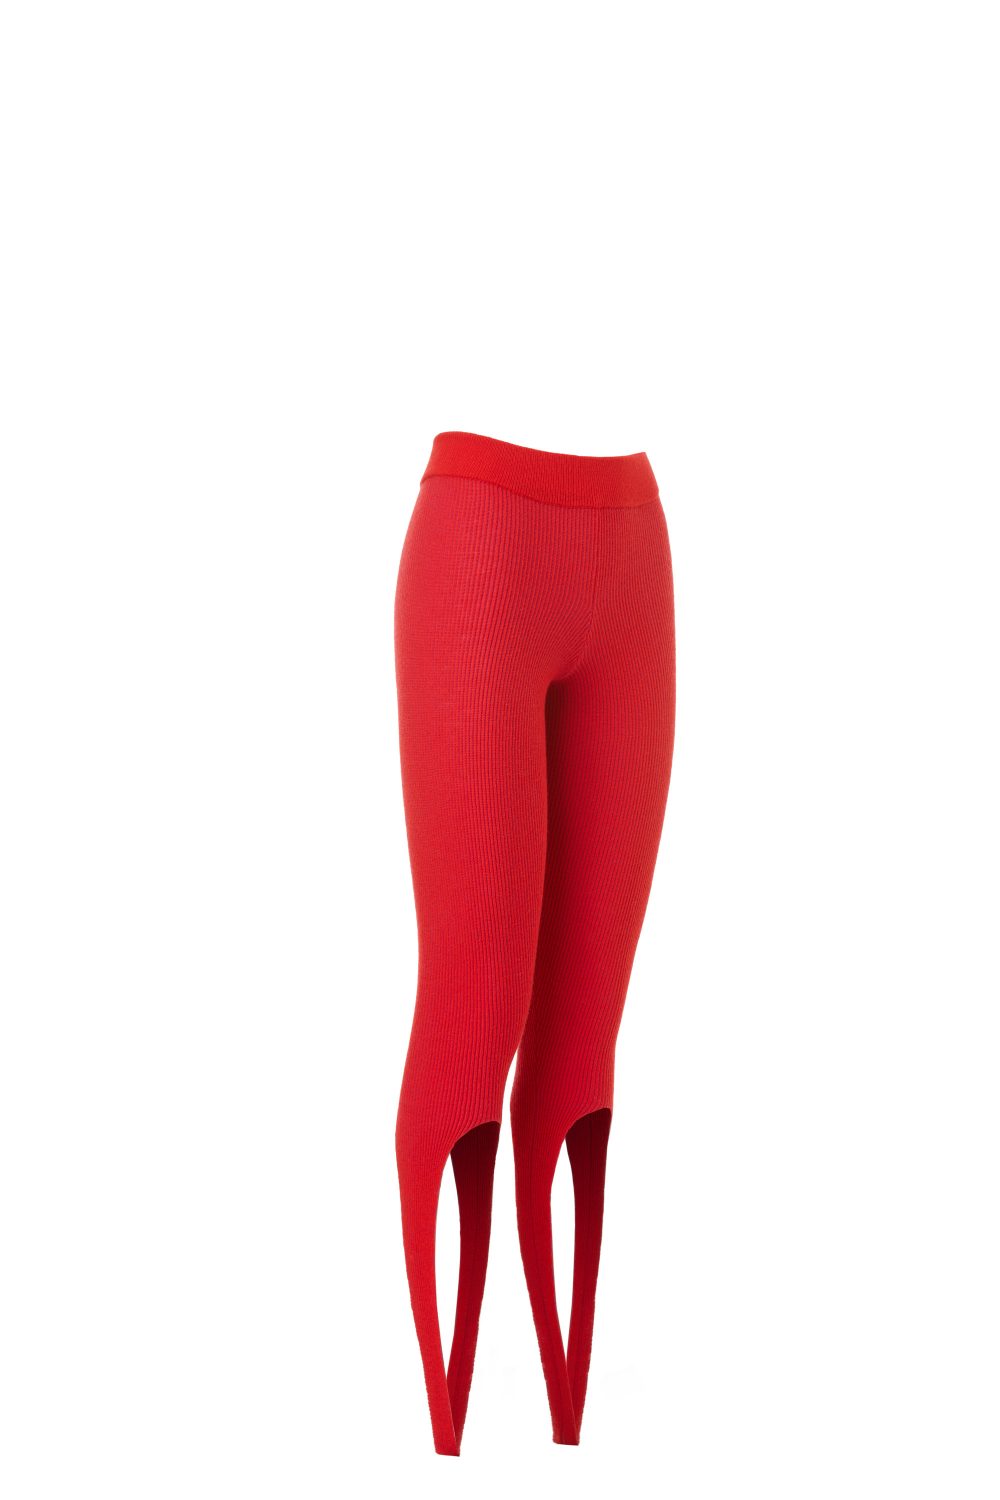 Knitted Leggings with Elongated Stirrups, Two-Tone Red - AmiAmalia ...